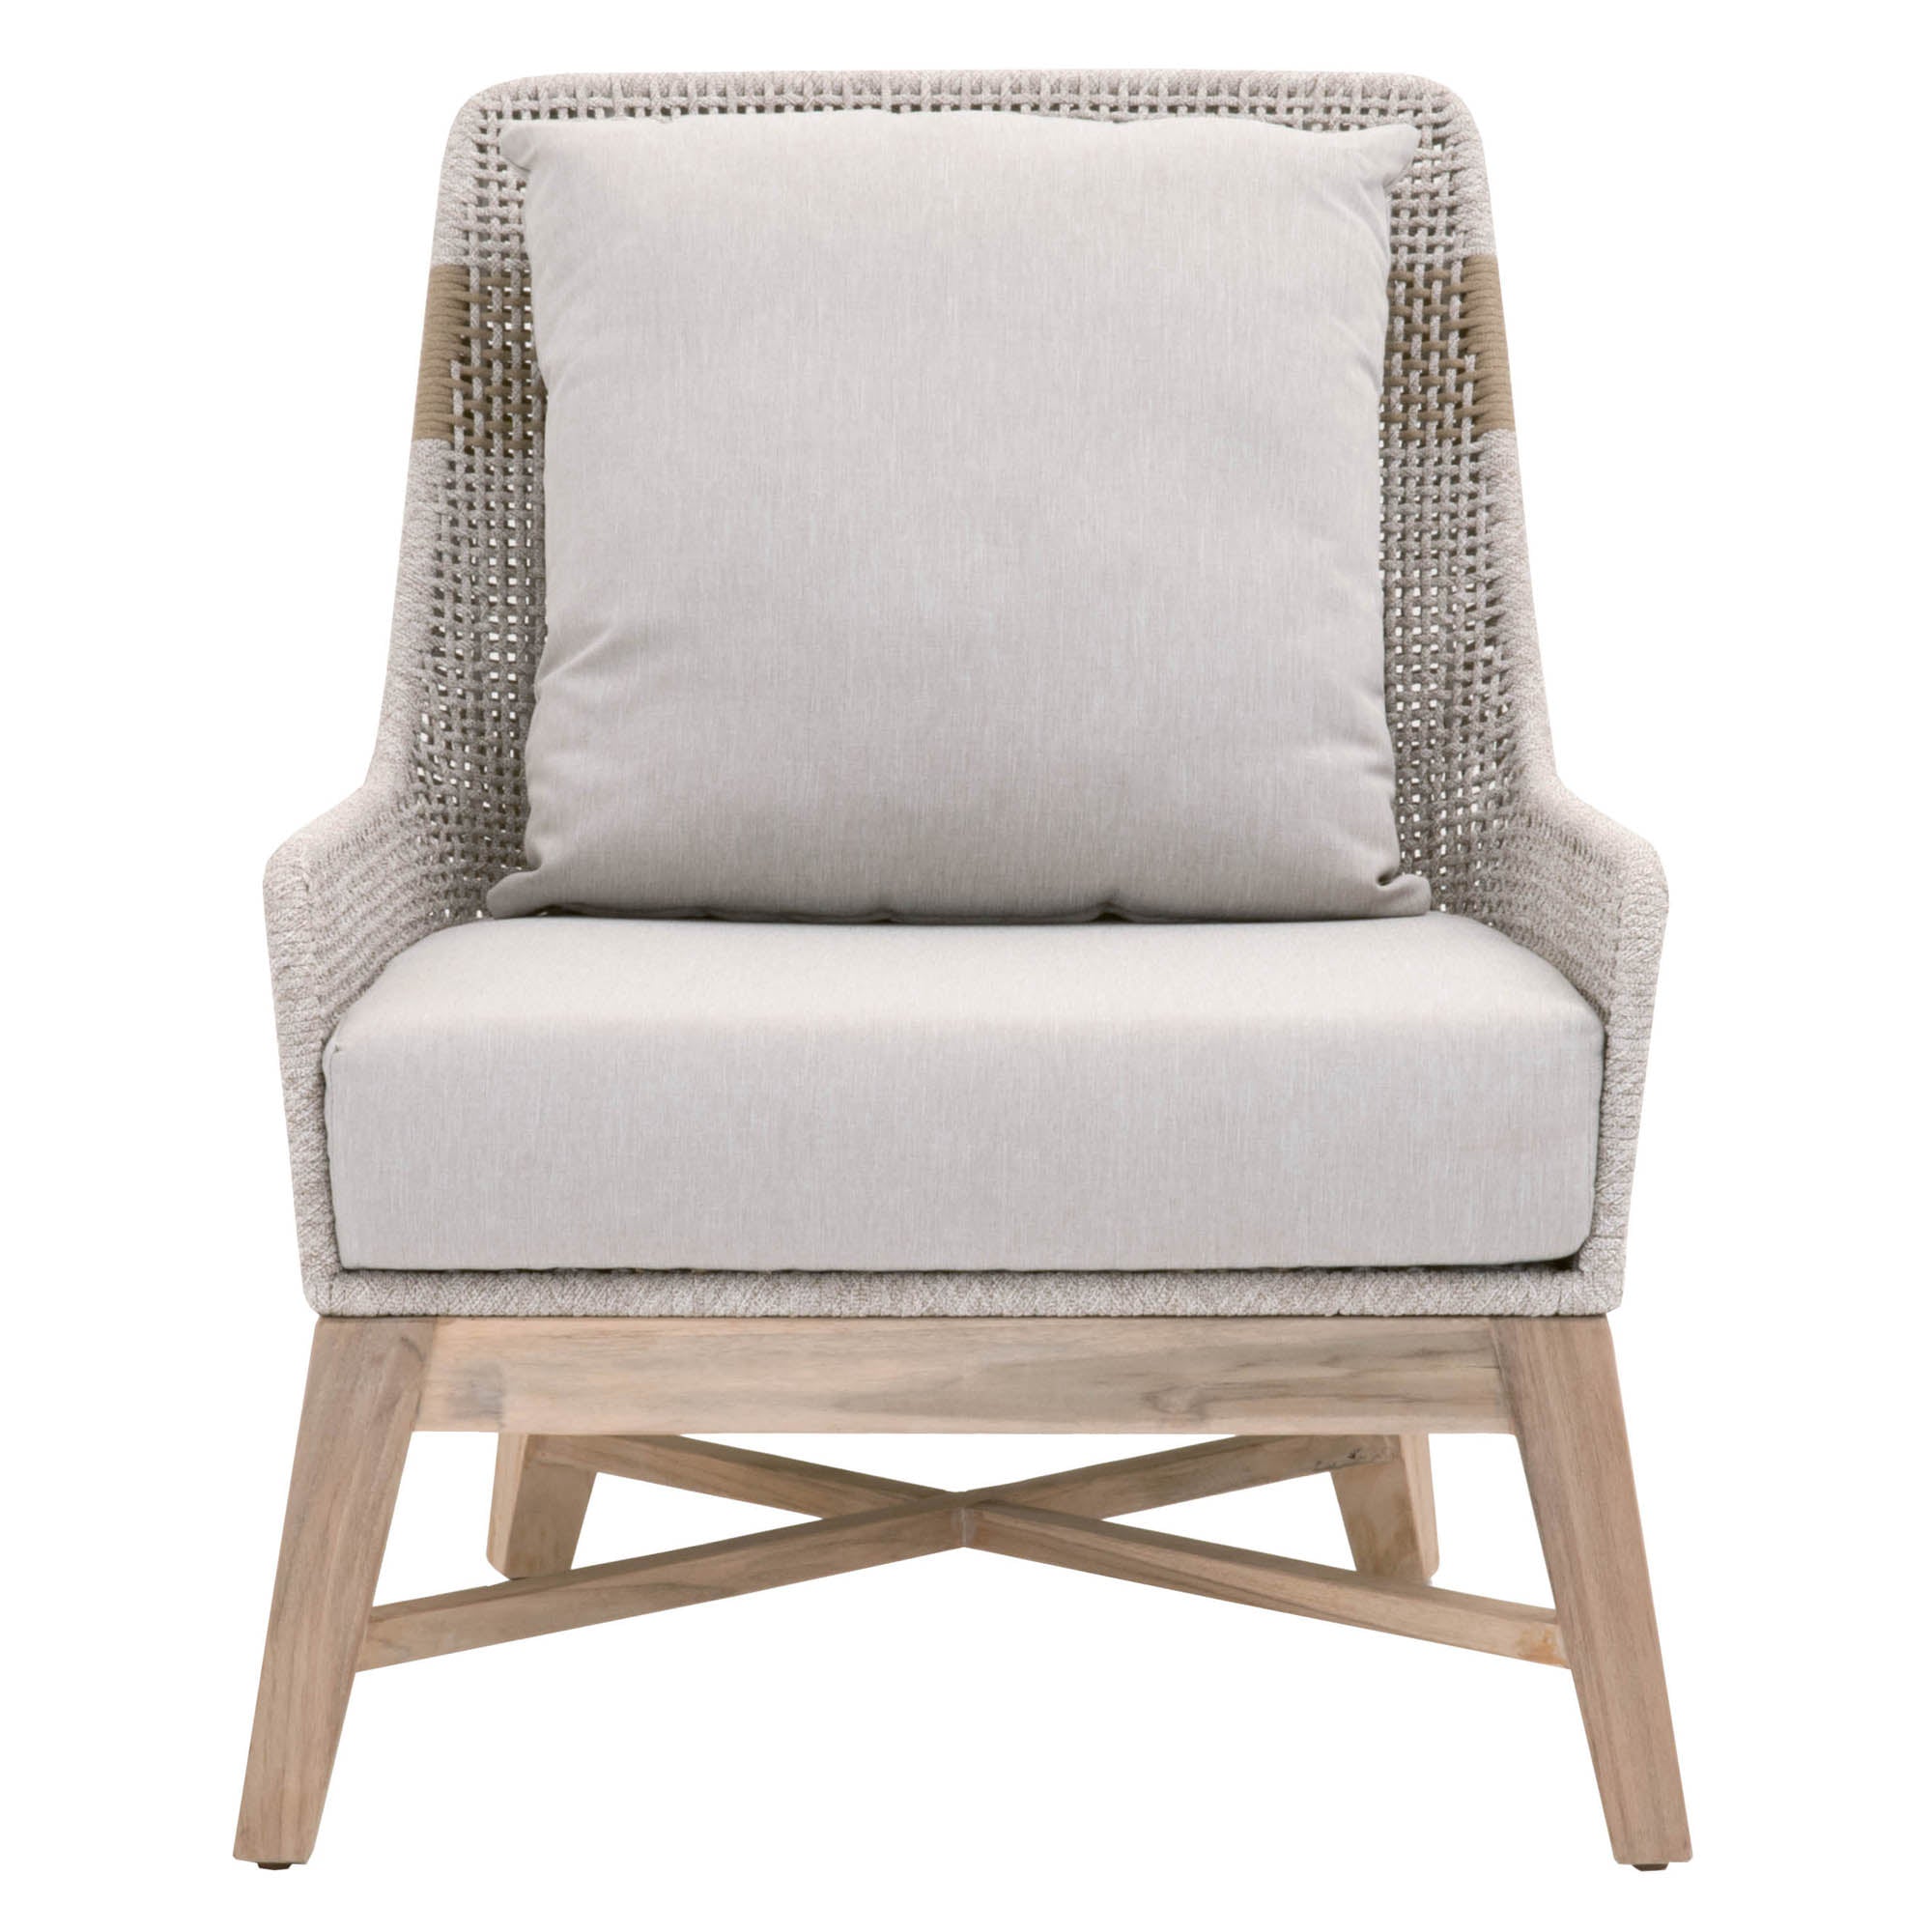 Essentials for Living-Tapestry Outdoor Club Chair-Outdoor Lounge Chairs-MODTEMPO